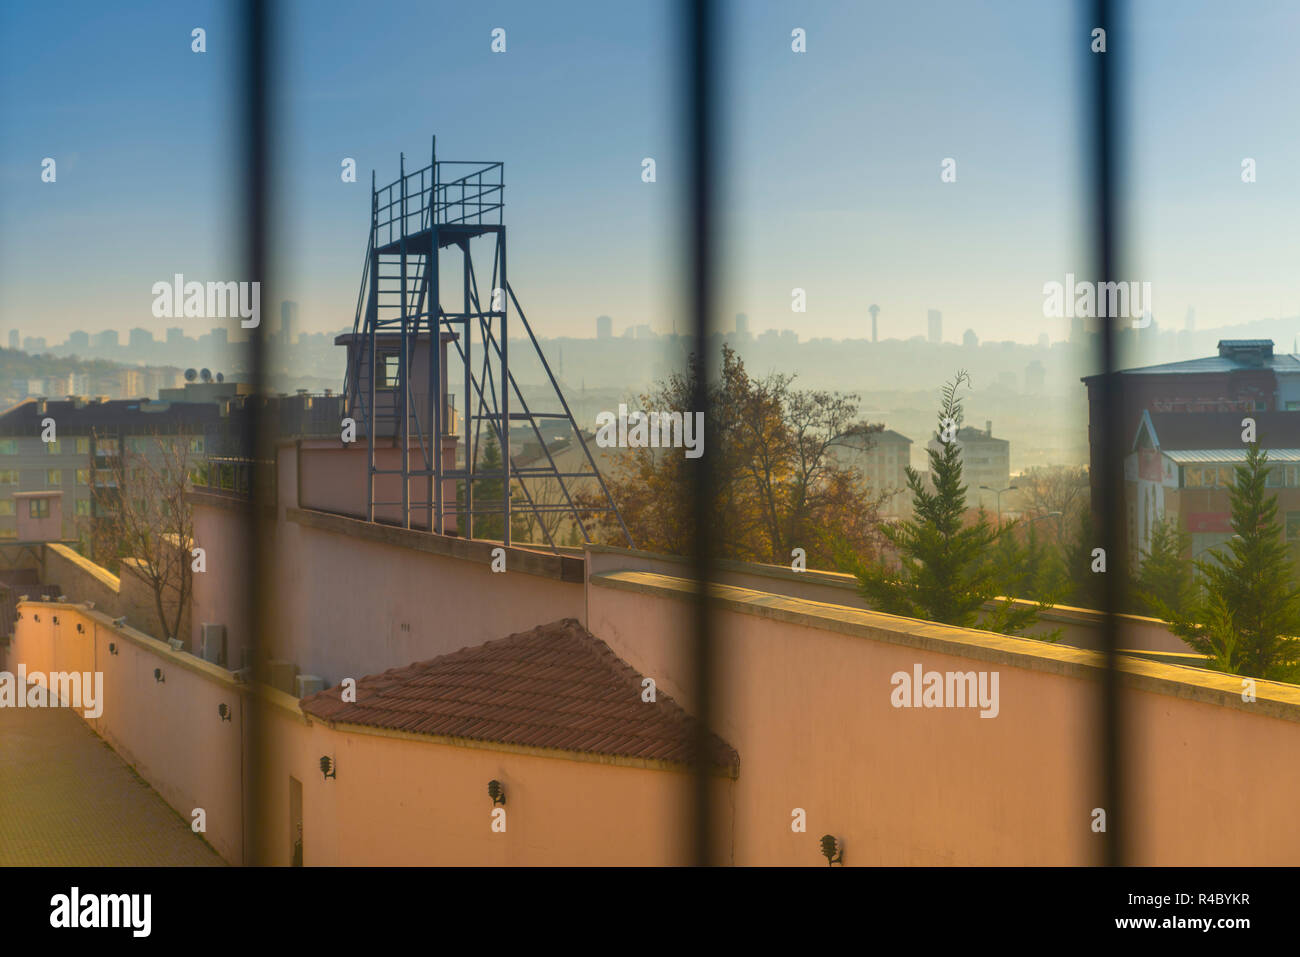 Ankara/Turkey-November 25 2018:  Behind the bars in Ulucanlar prison and Ankara silhouette in background. This jail part as known 'Hilton' for popular Stock Photo